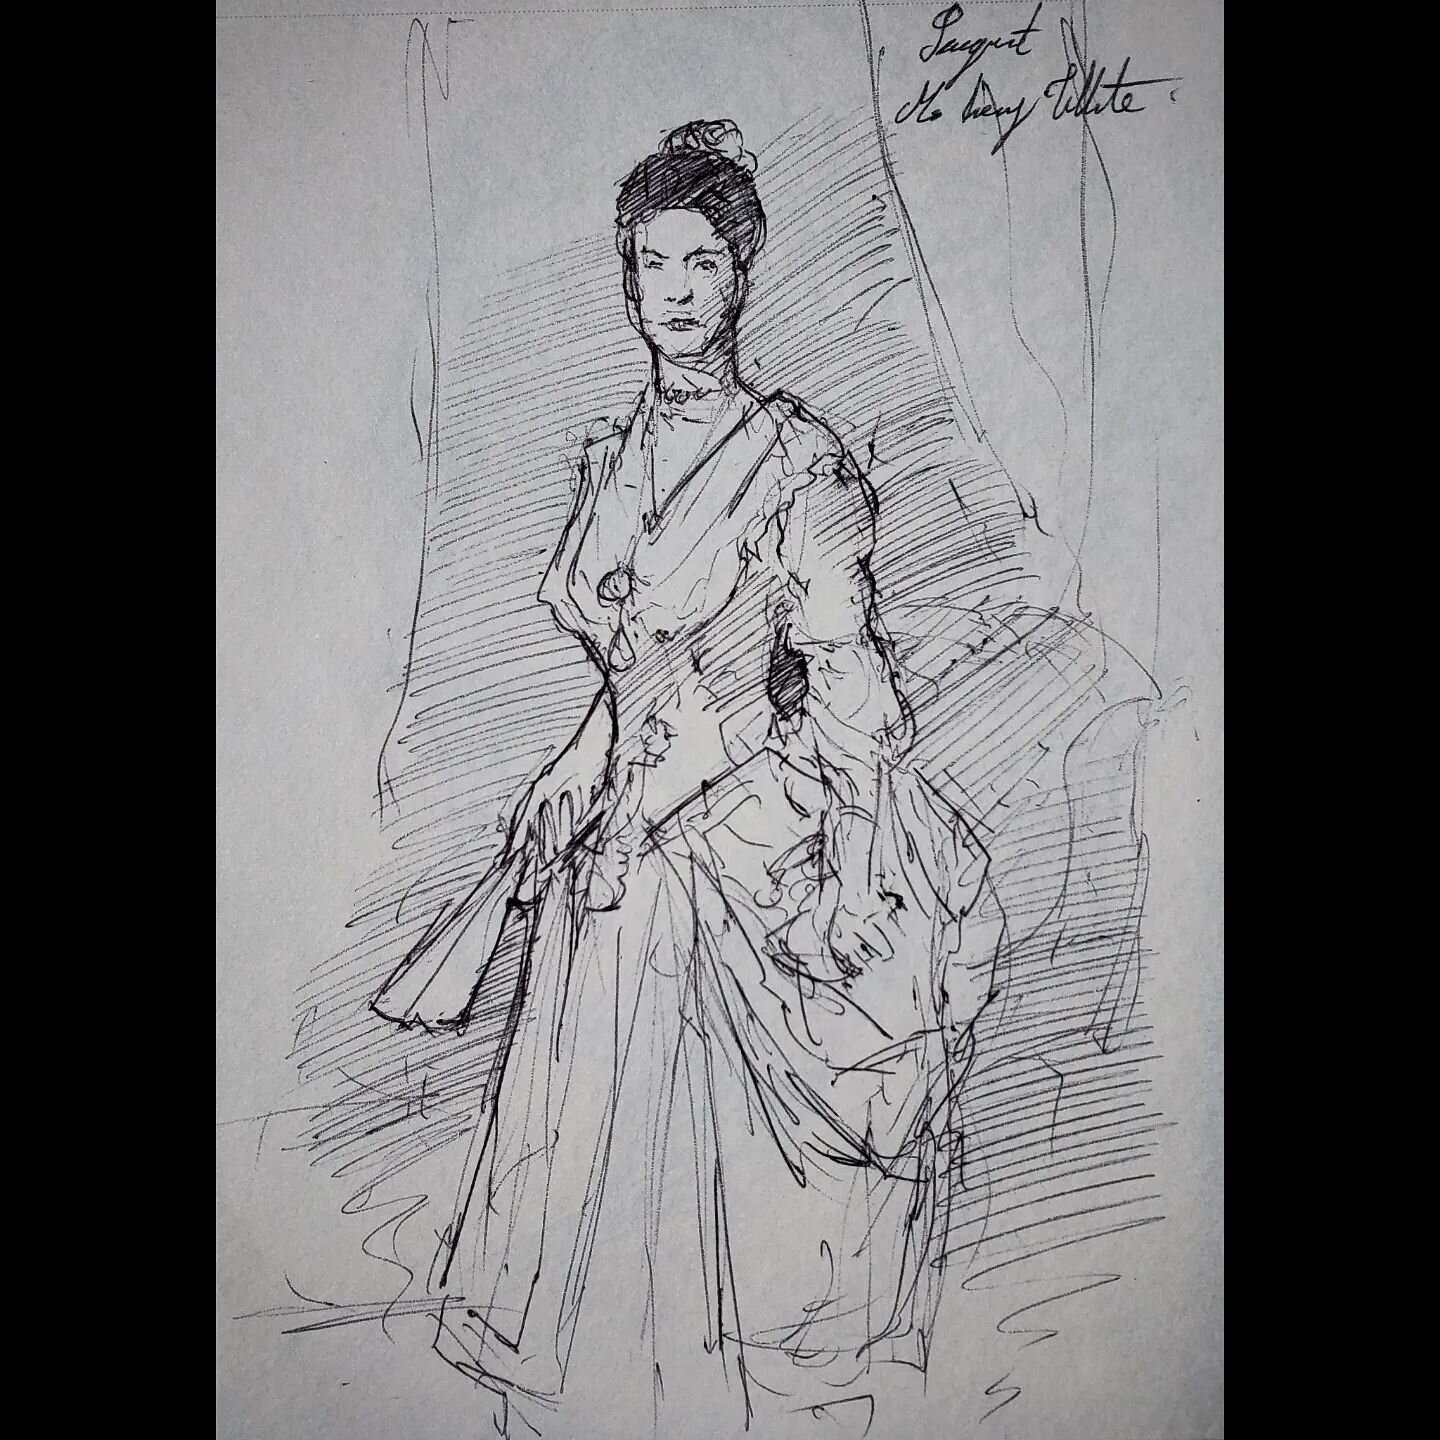 10 minute museum study at National Gallery of Art in DC. 
.
&quot;Mrs. Henry White&quot;
By John Singer Sargent
.
.
.
#cameronbyeart #nationalgalleryofart #artstudy #sketchbook #sketching #sketch #pen #sargent #portrait